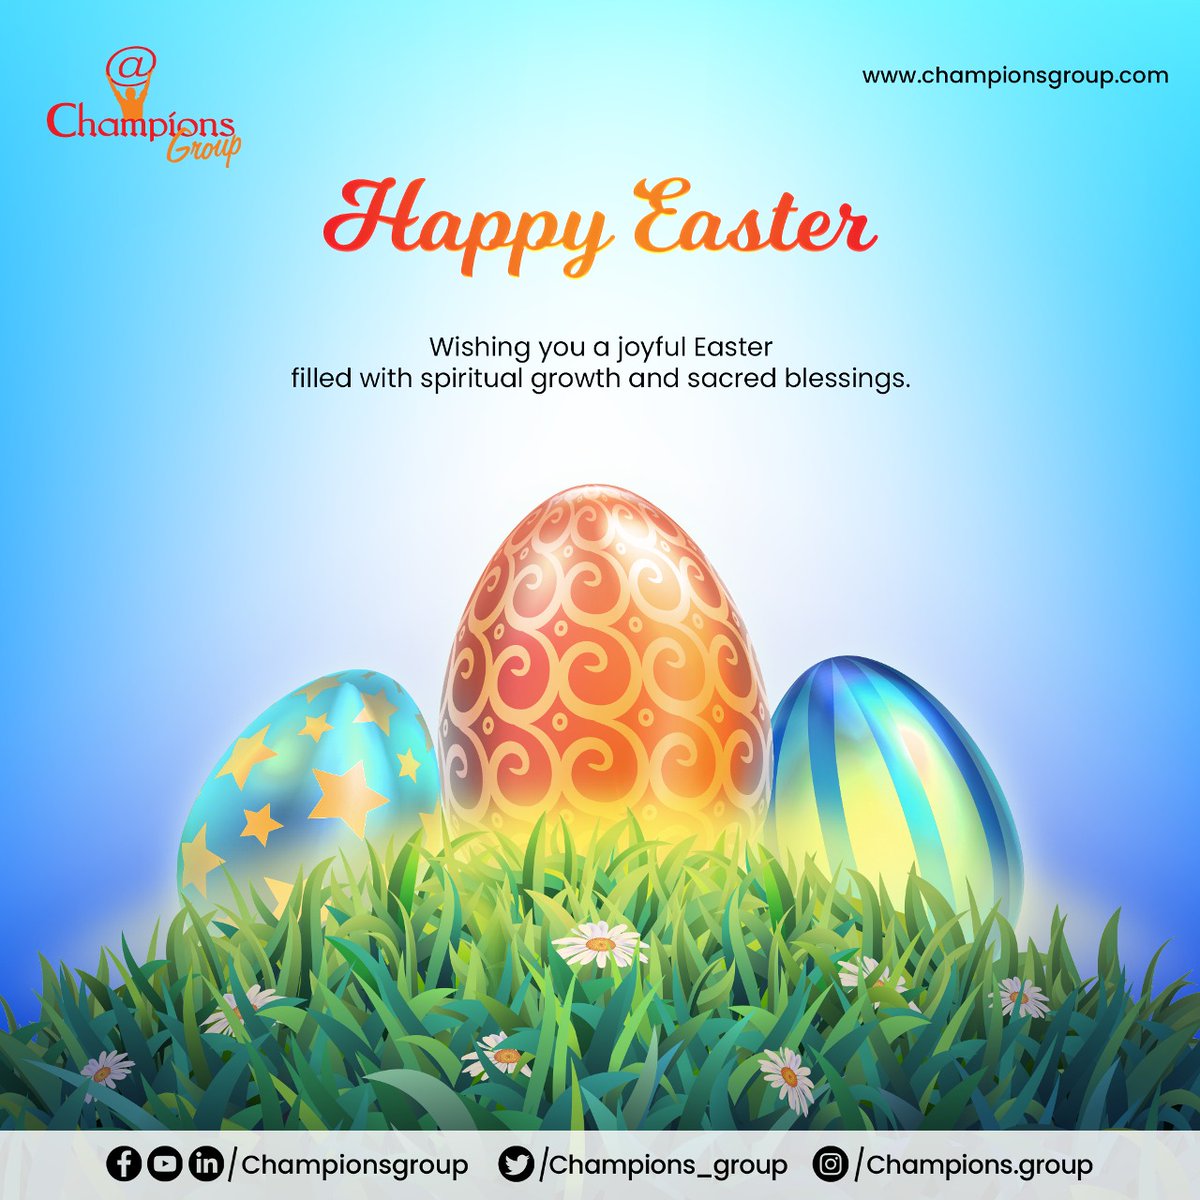 🌸🐣🌼 #HappyEaster from #ChampionsGroup! 🌟 Celebrate with loved ones, reflect on blessings, and may joy and peace fill your days. 🐰💖✨ #EasterJoy #Blessings 🌷🕊️